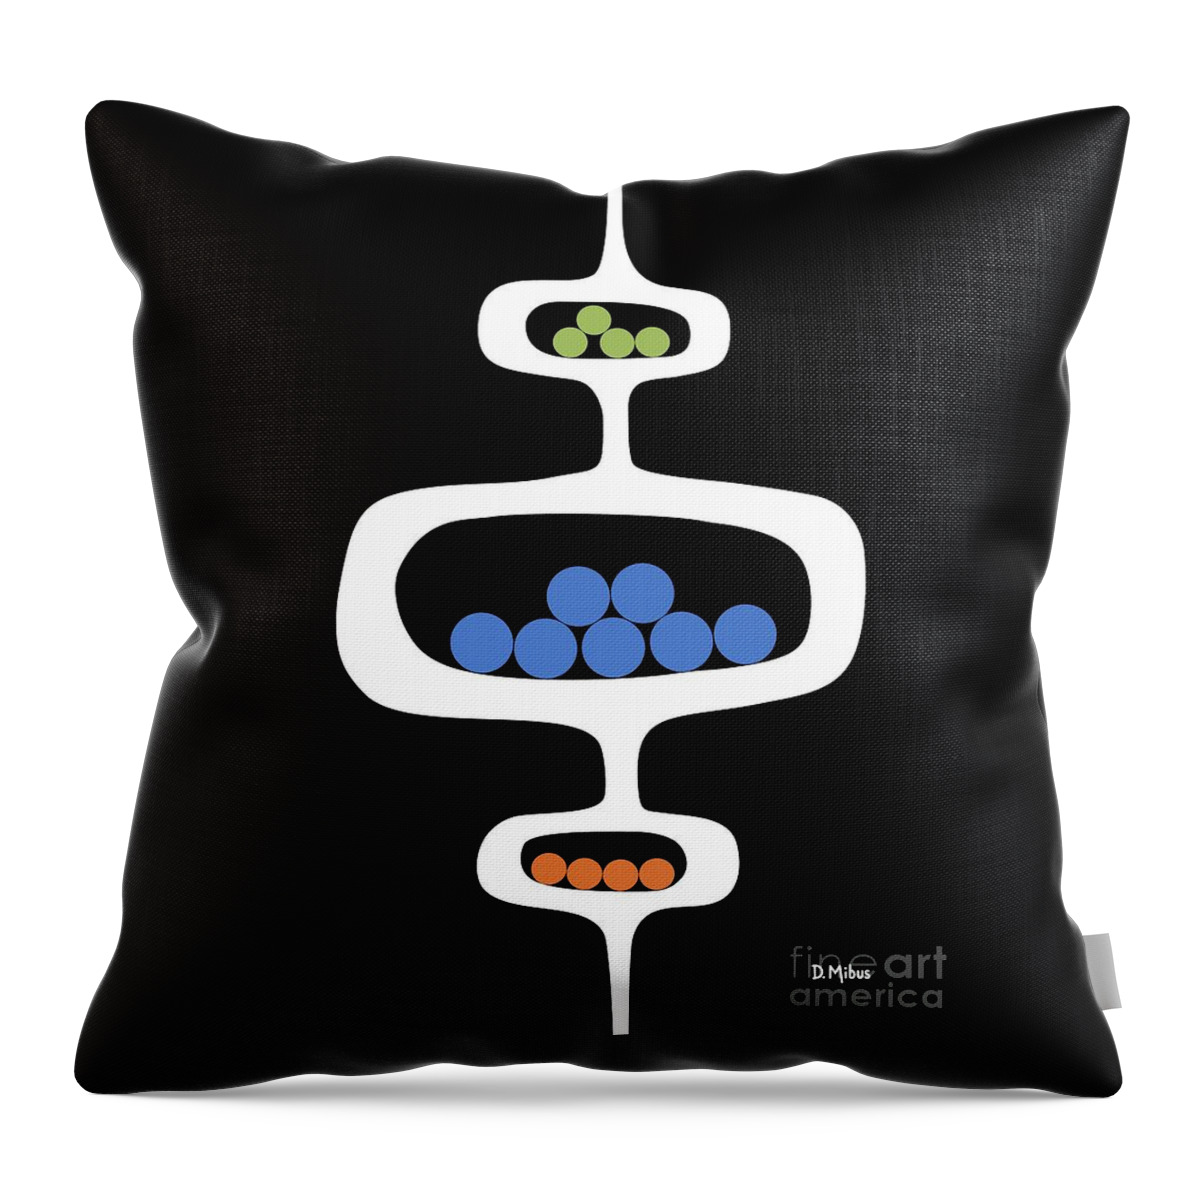 Mid Century Pods Throw Pillow featuring the digital art Mod Pod 1 with Circles on Black by Donna Mibus